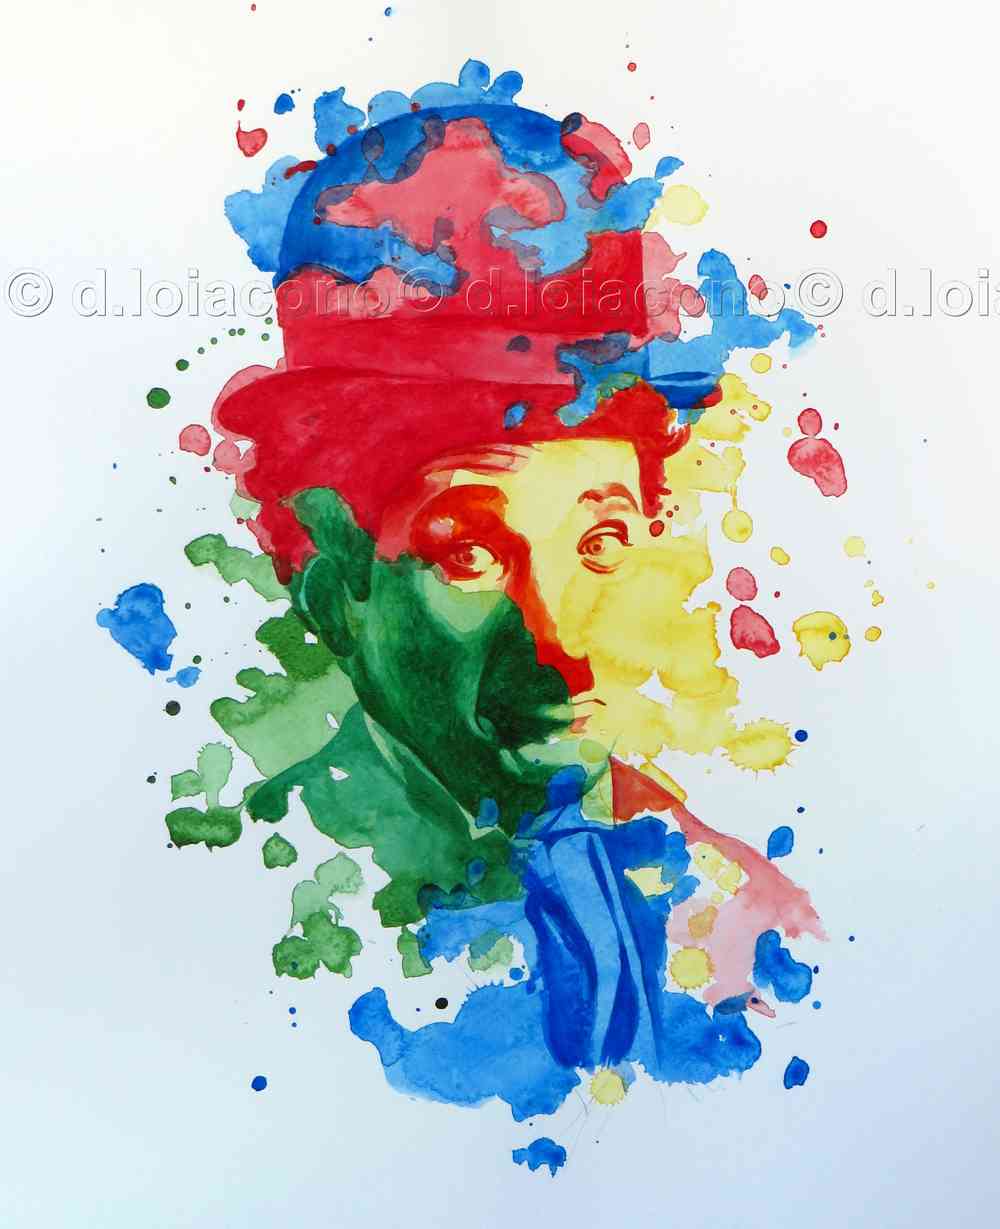 he power of color - Charlie Chaplin